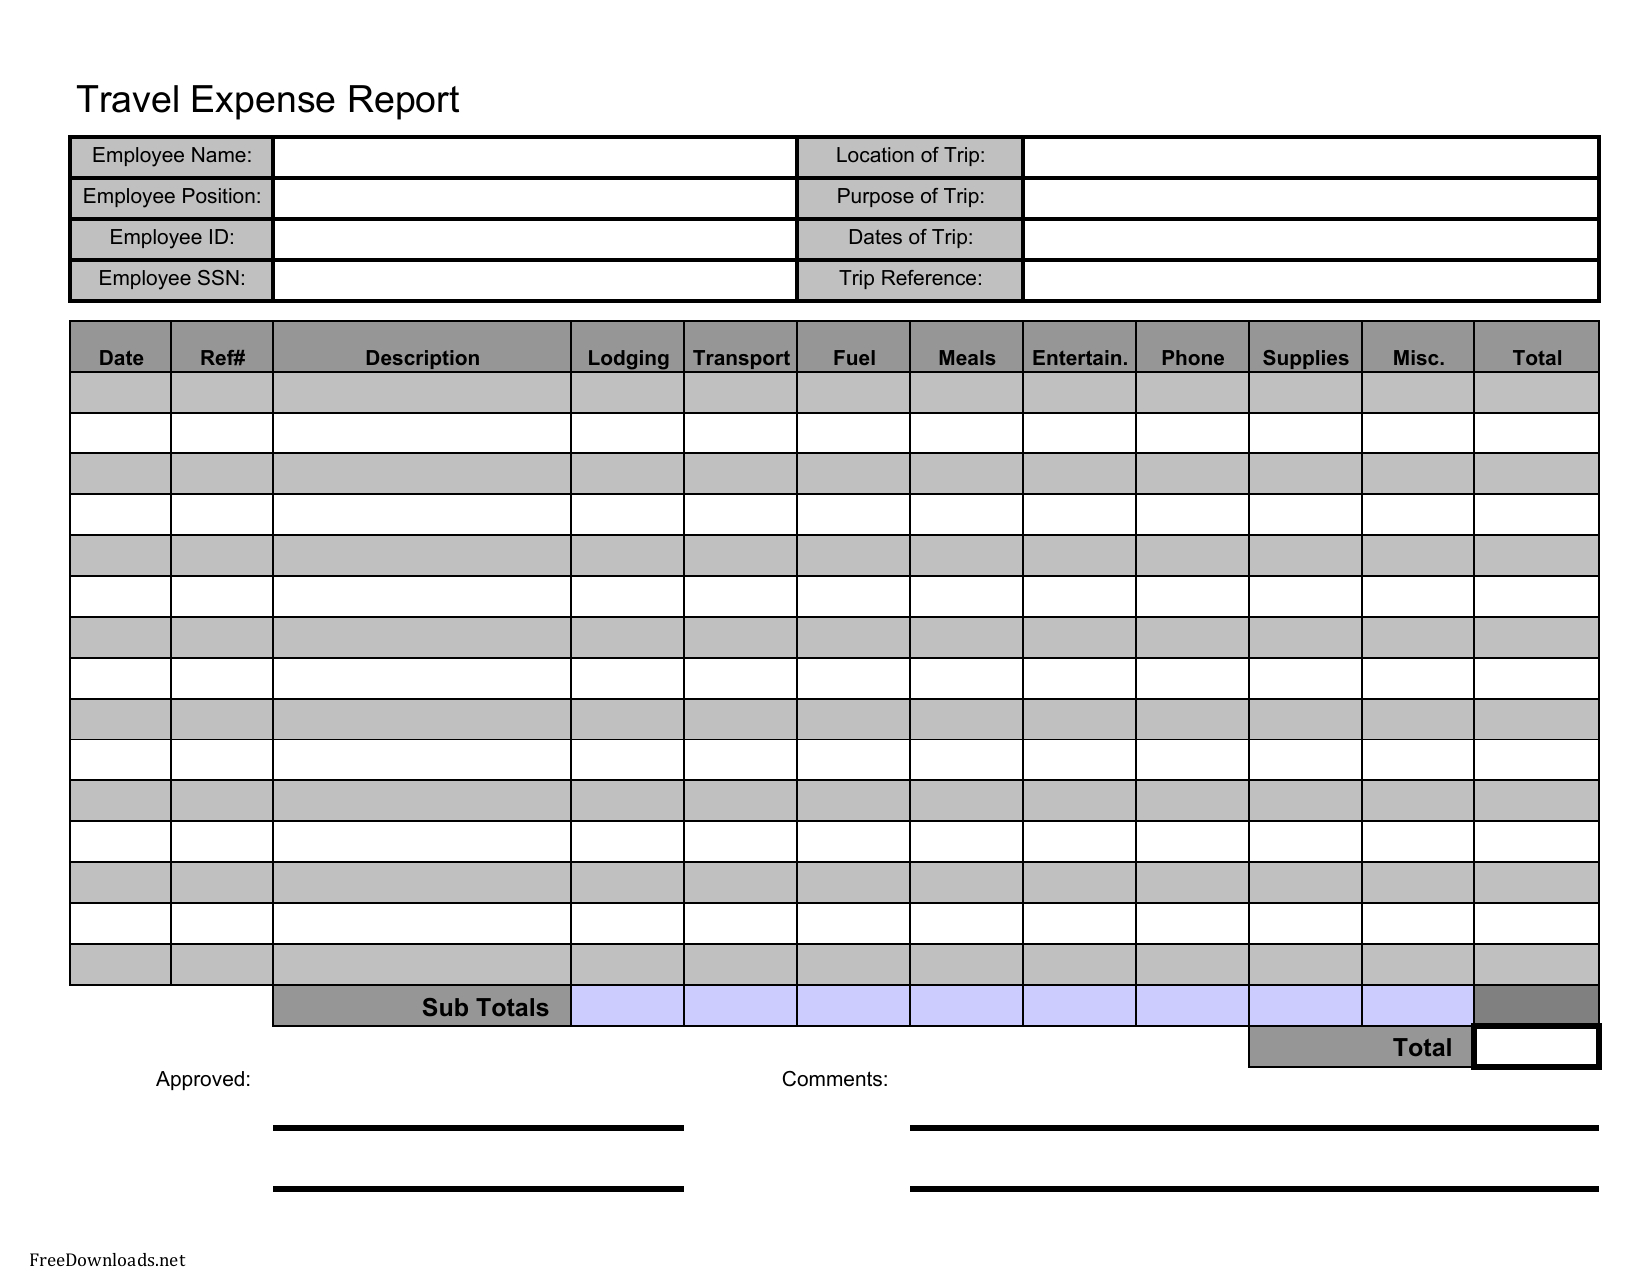 daily-expenses-sheet-in-excel-format-free-download-1-excelxo